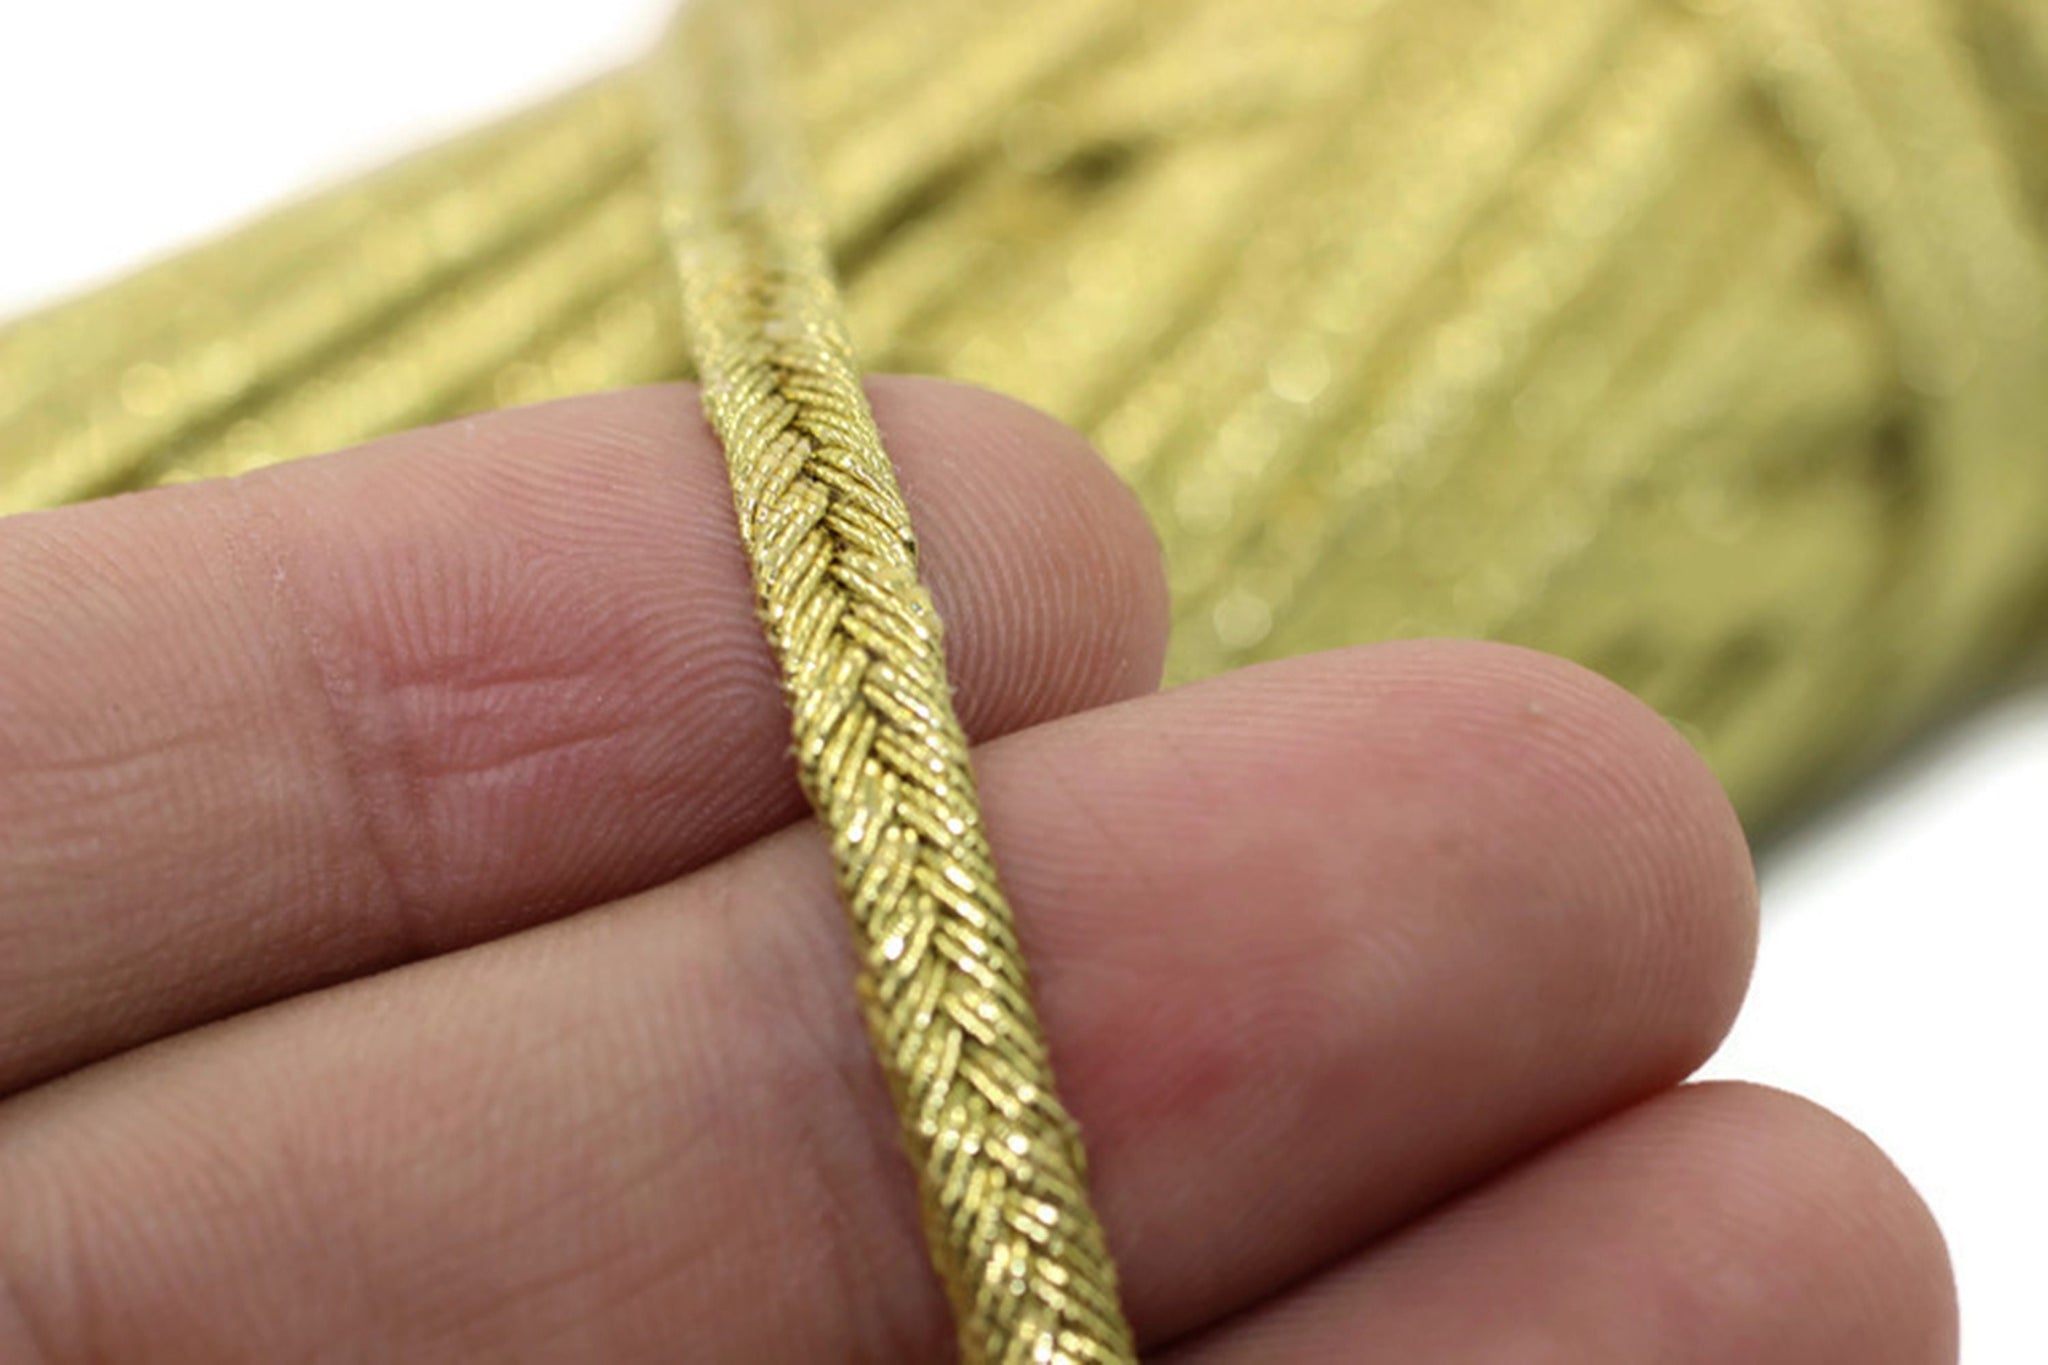 5 mm Thick Soutache Cord, Metallic Gold Braid Cord, 5 mm Twisted